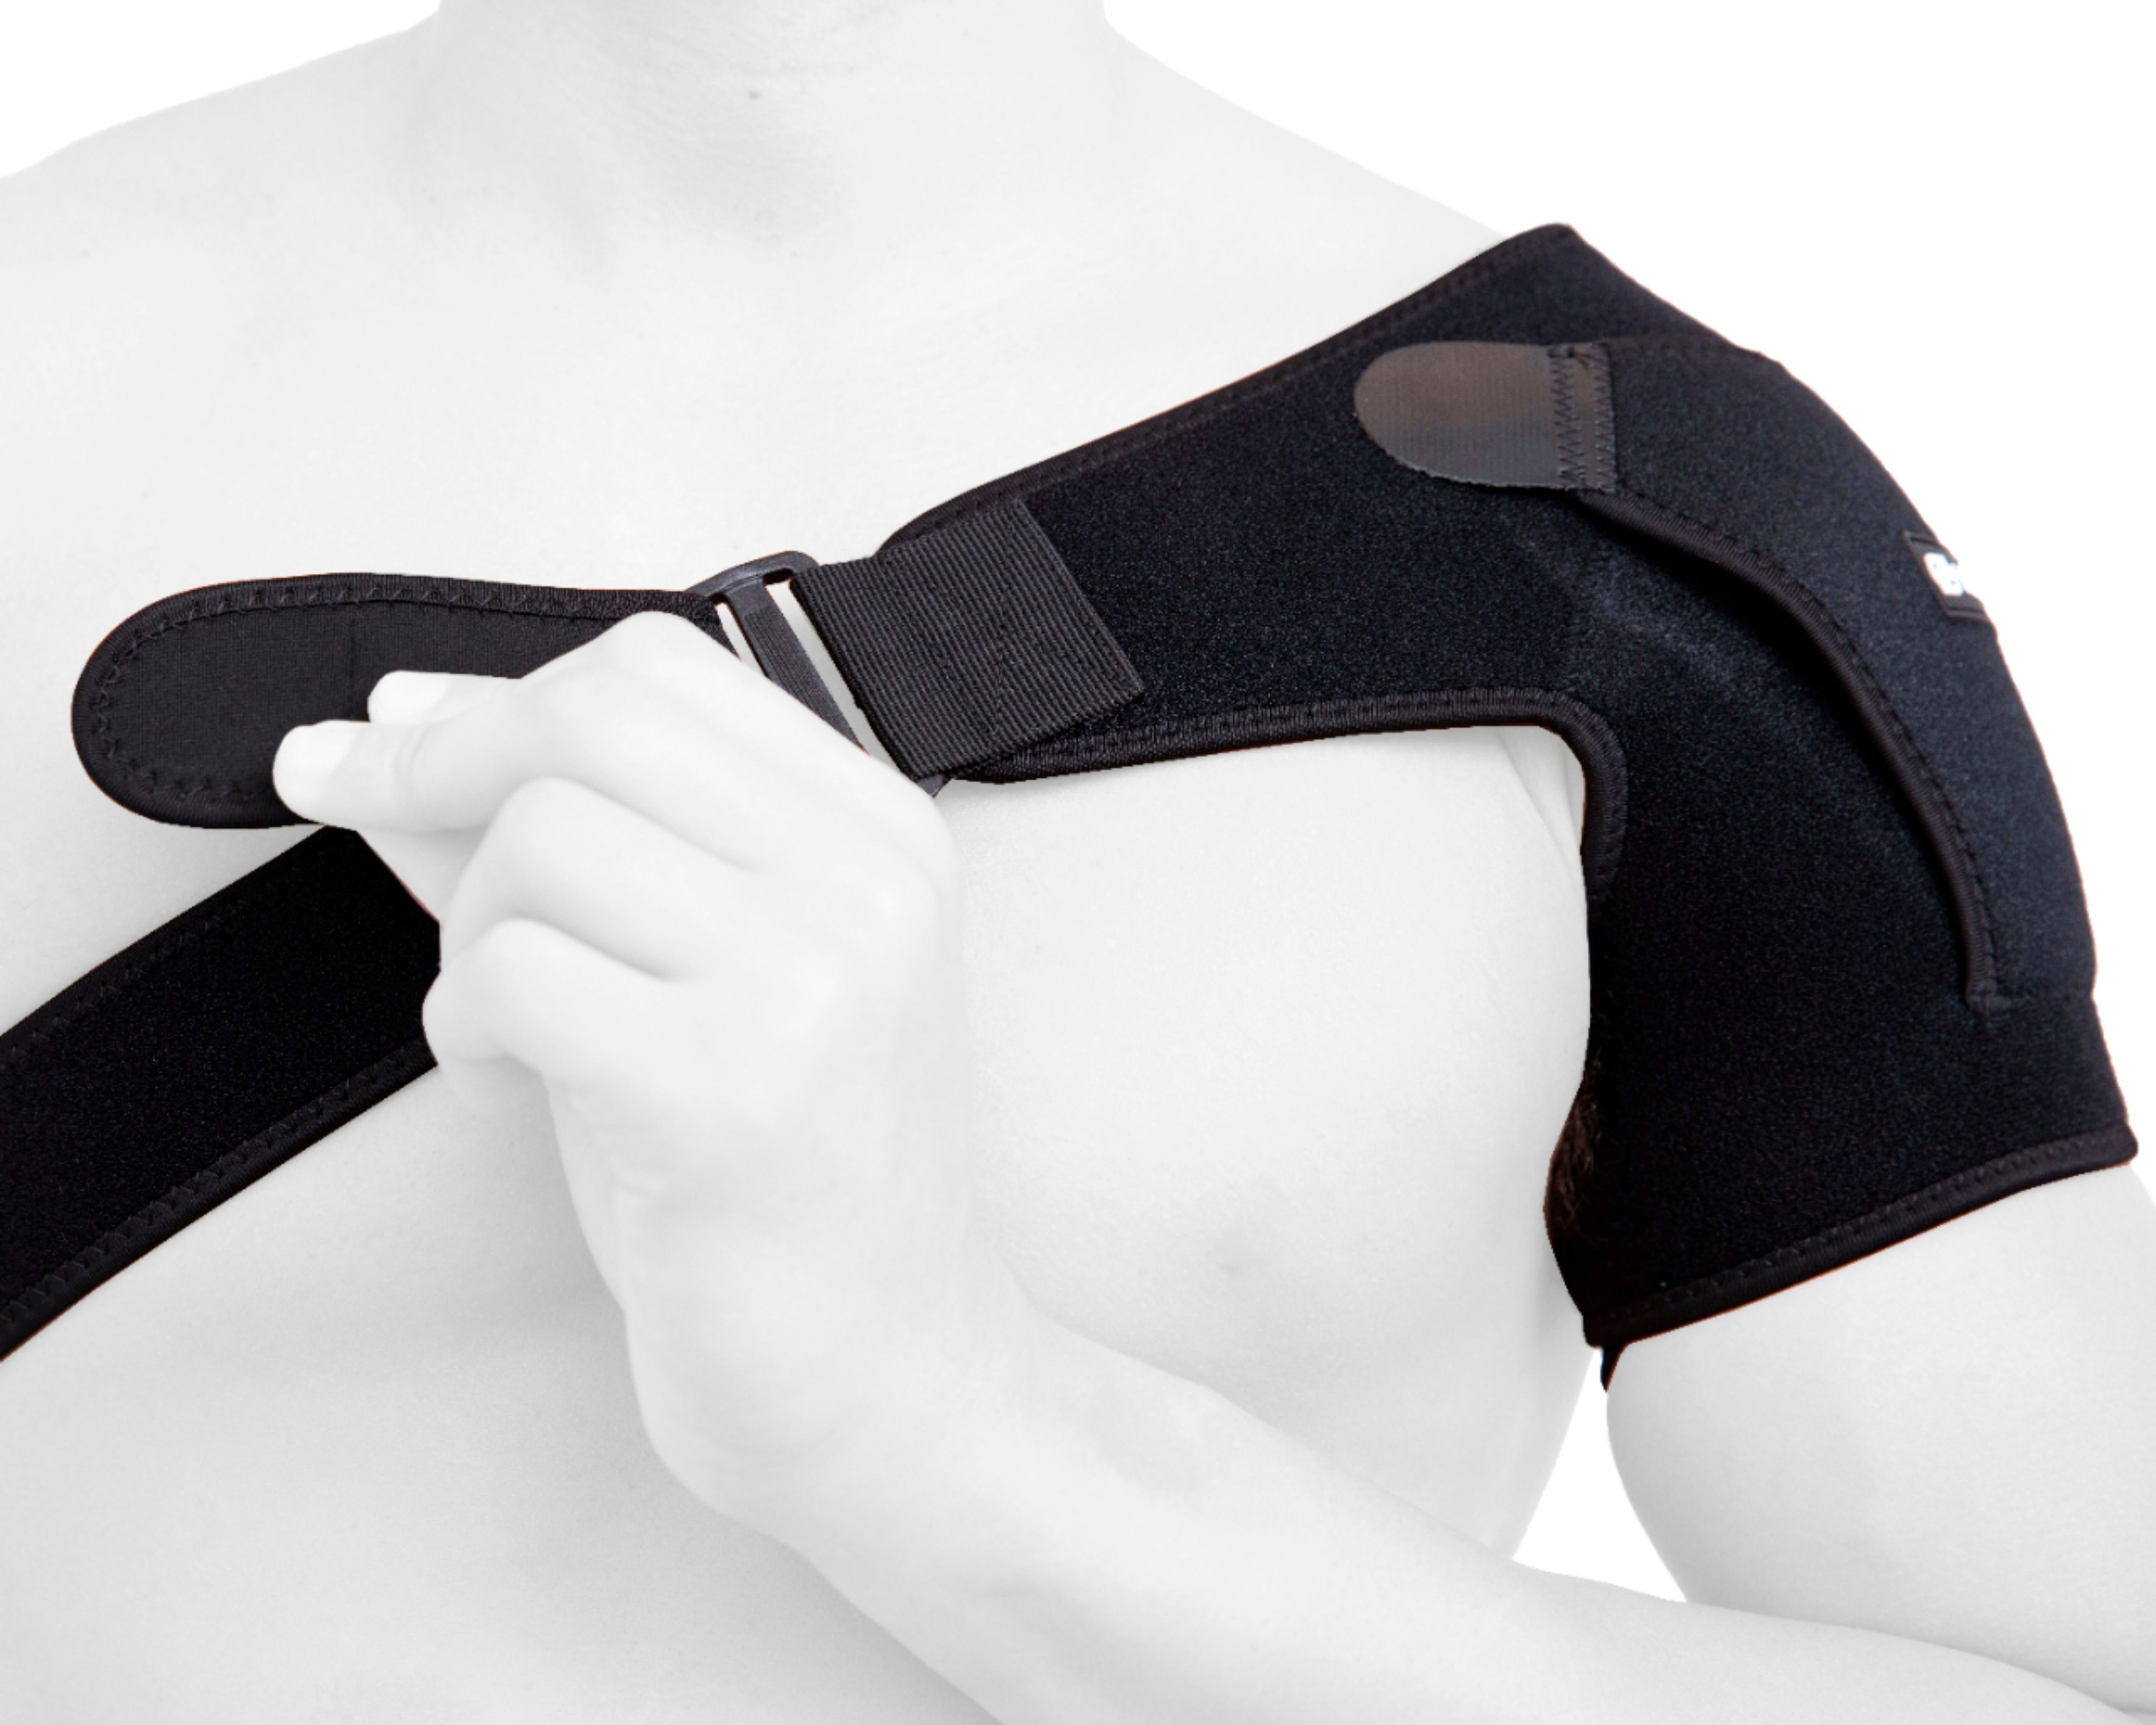 Copper Compression Recovery Shoulder Brace